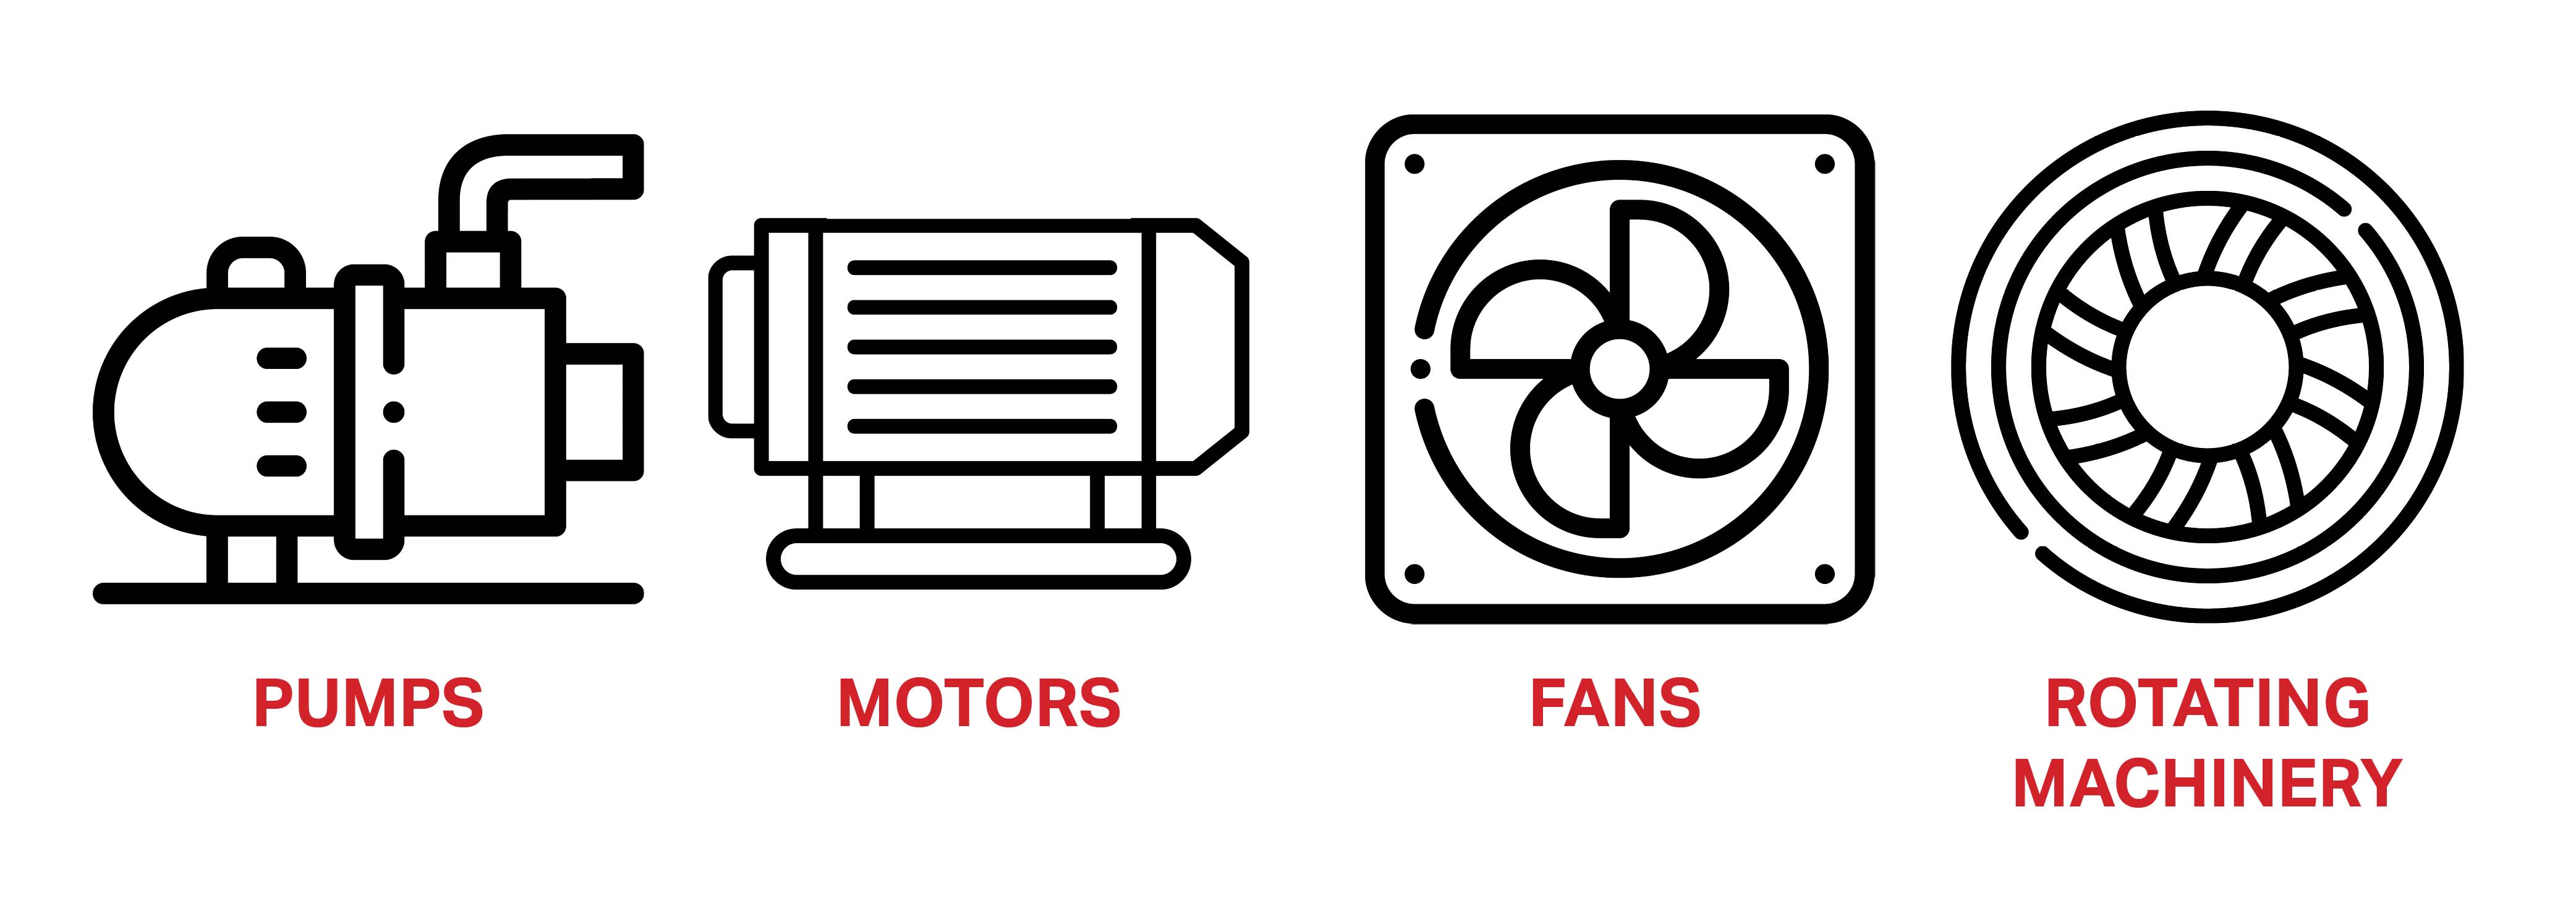 black line drawing icons of machinery including a pump, a motor, a fan, and rotating machinery